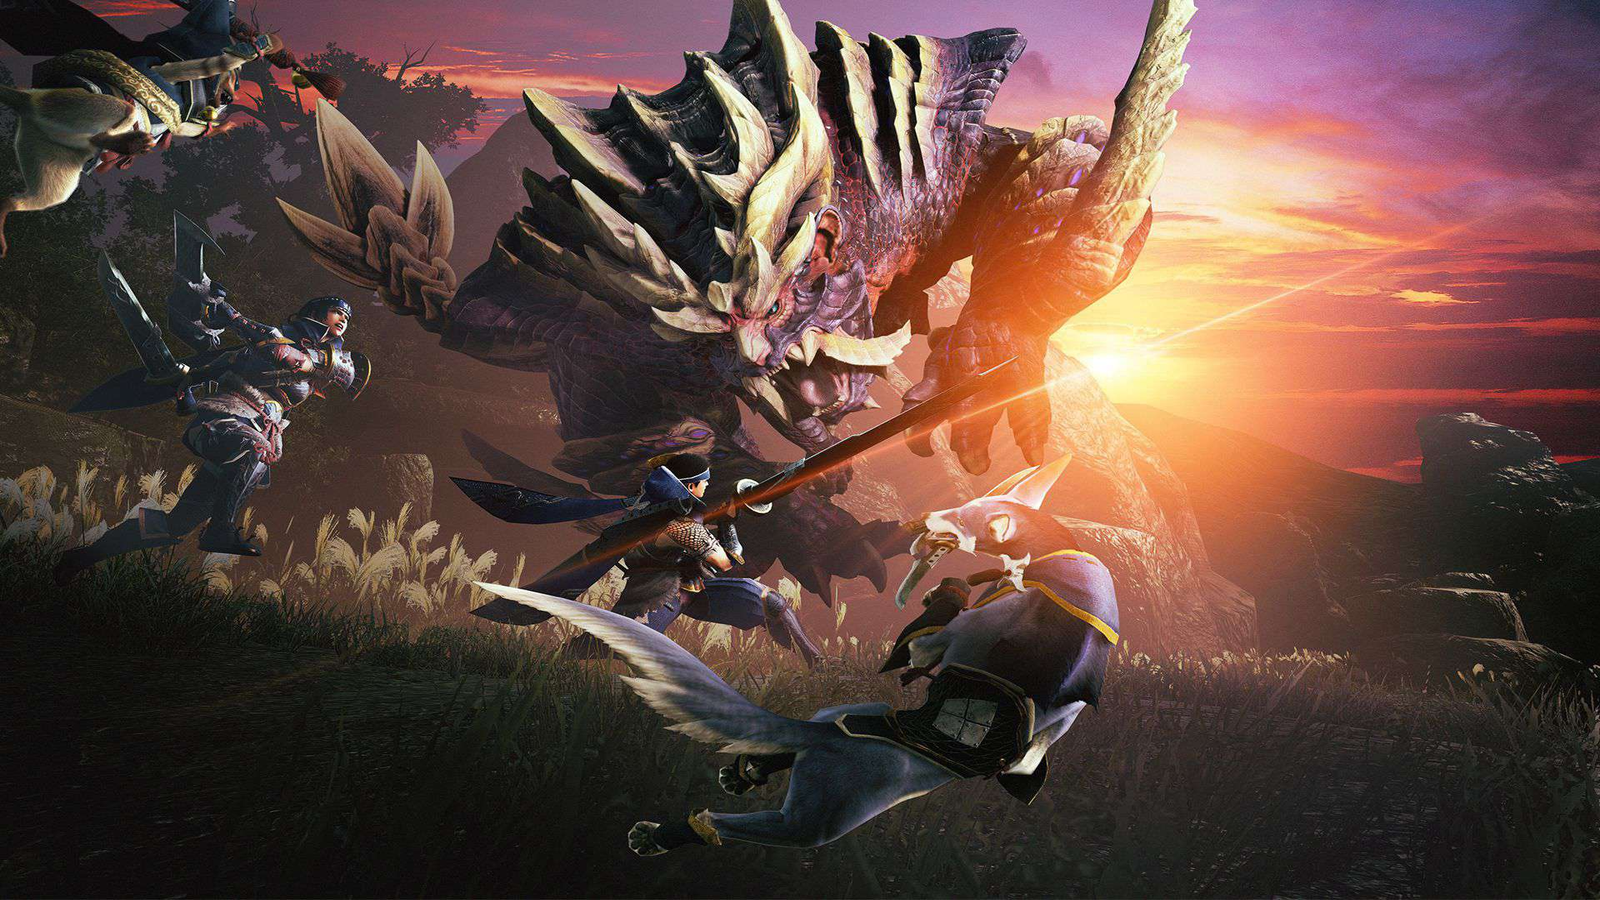 Monster Hunter Rise gameplay features the Great Sword for 6 minutes